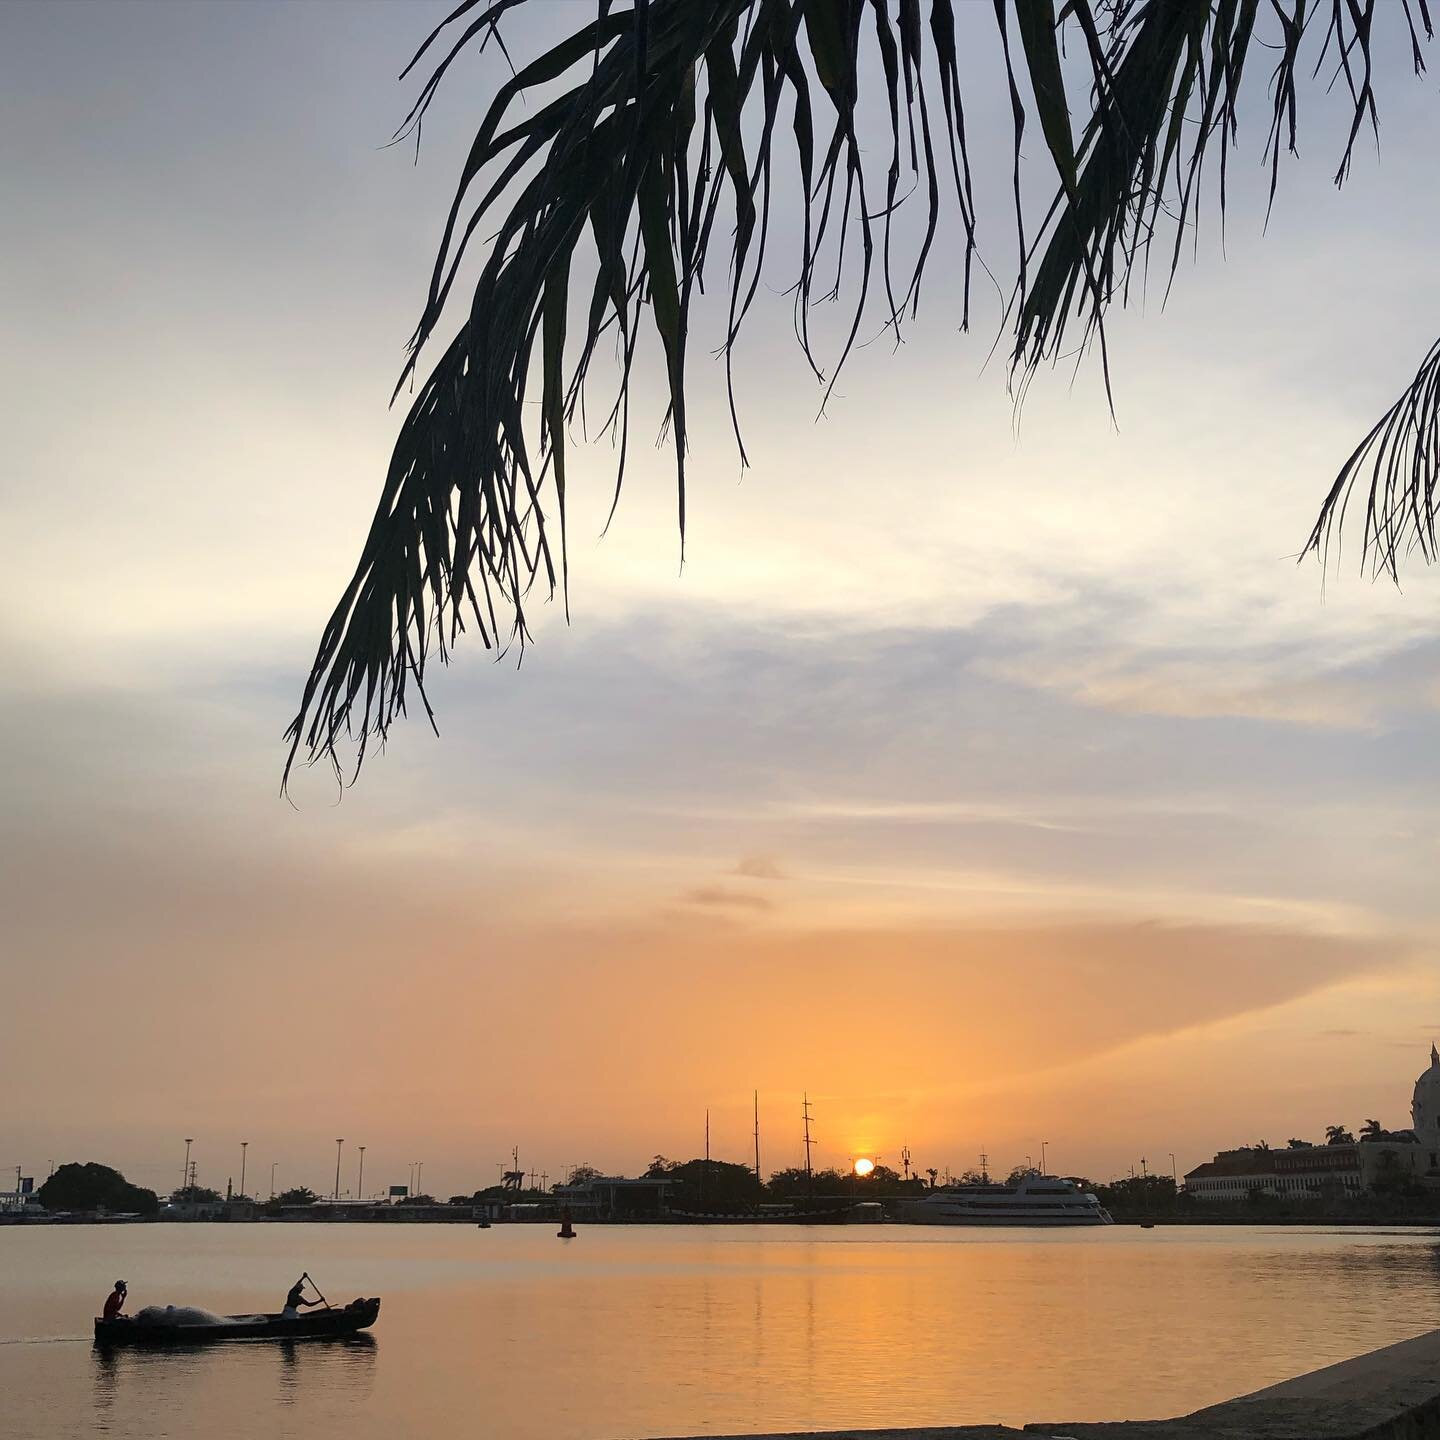 Sunsets in the Caribbean are extra special these days. Things are almost moving backwards.

#caribbean
#sunsets
#fishing
#cartagena
#villagelife
#thisiscartagena
@thisiscolombiatravel